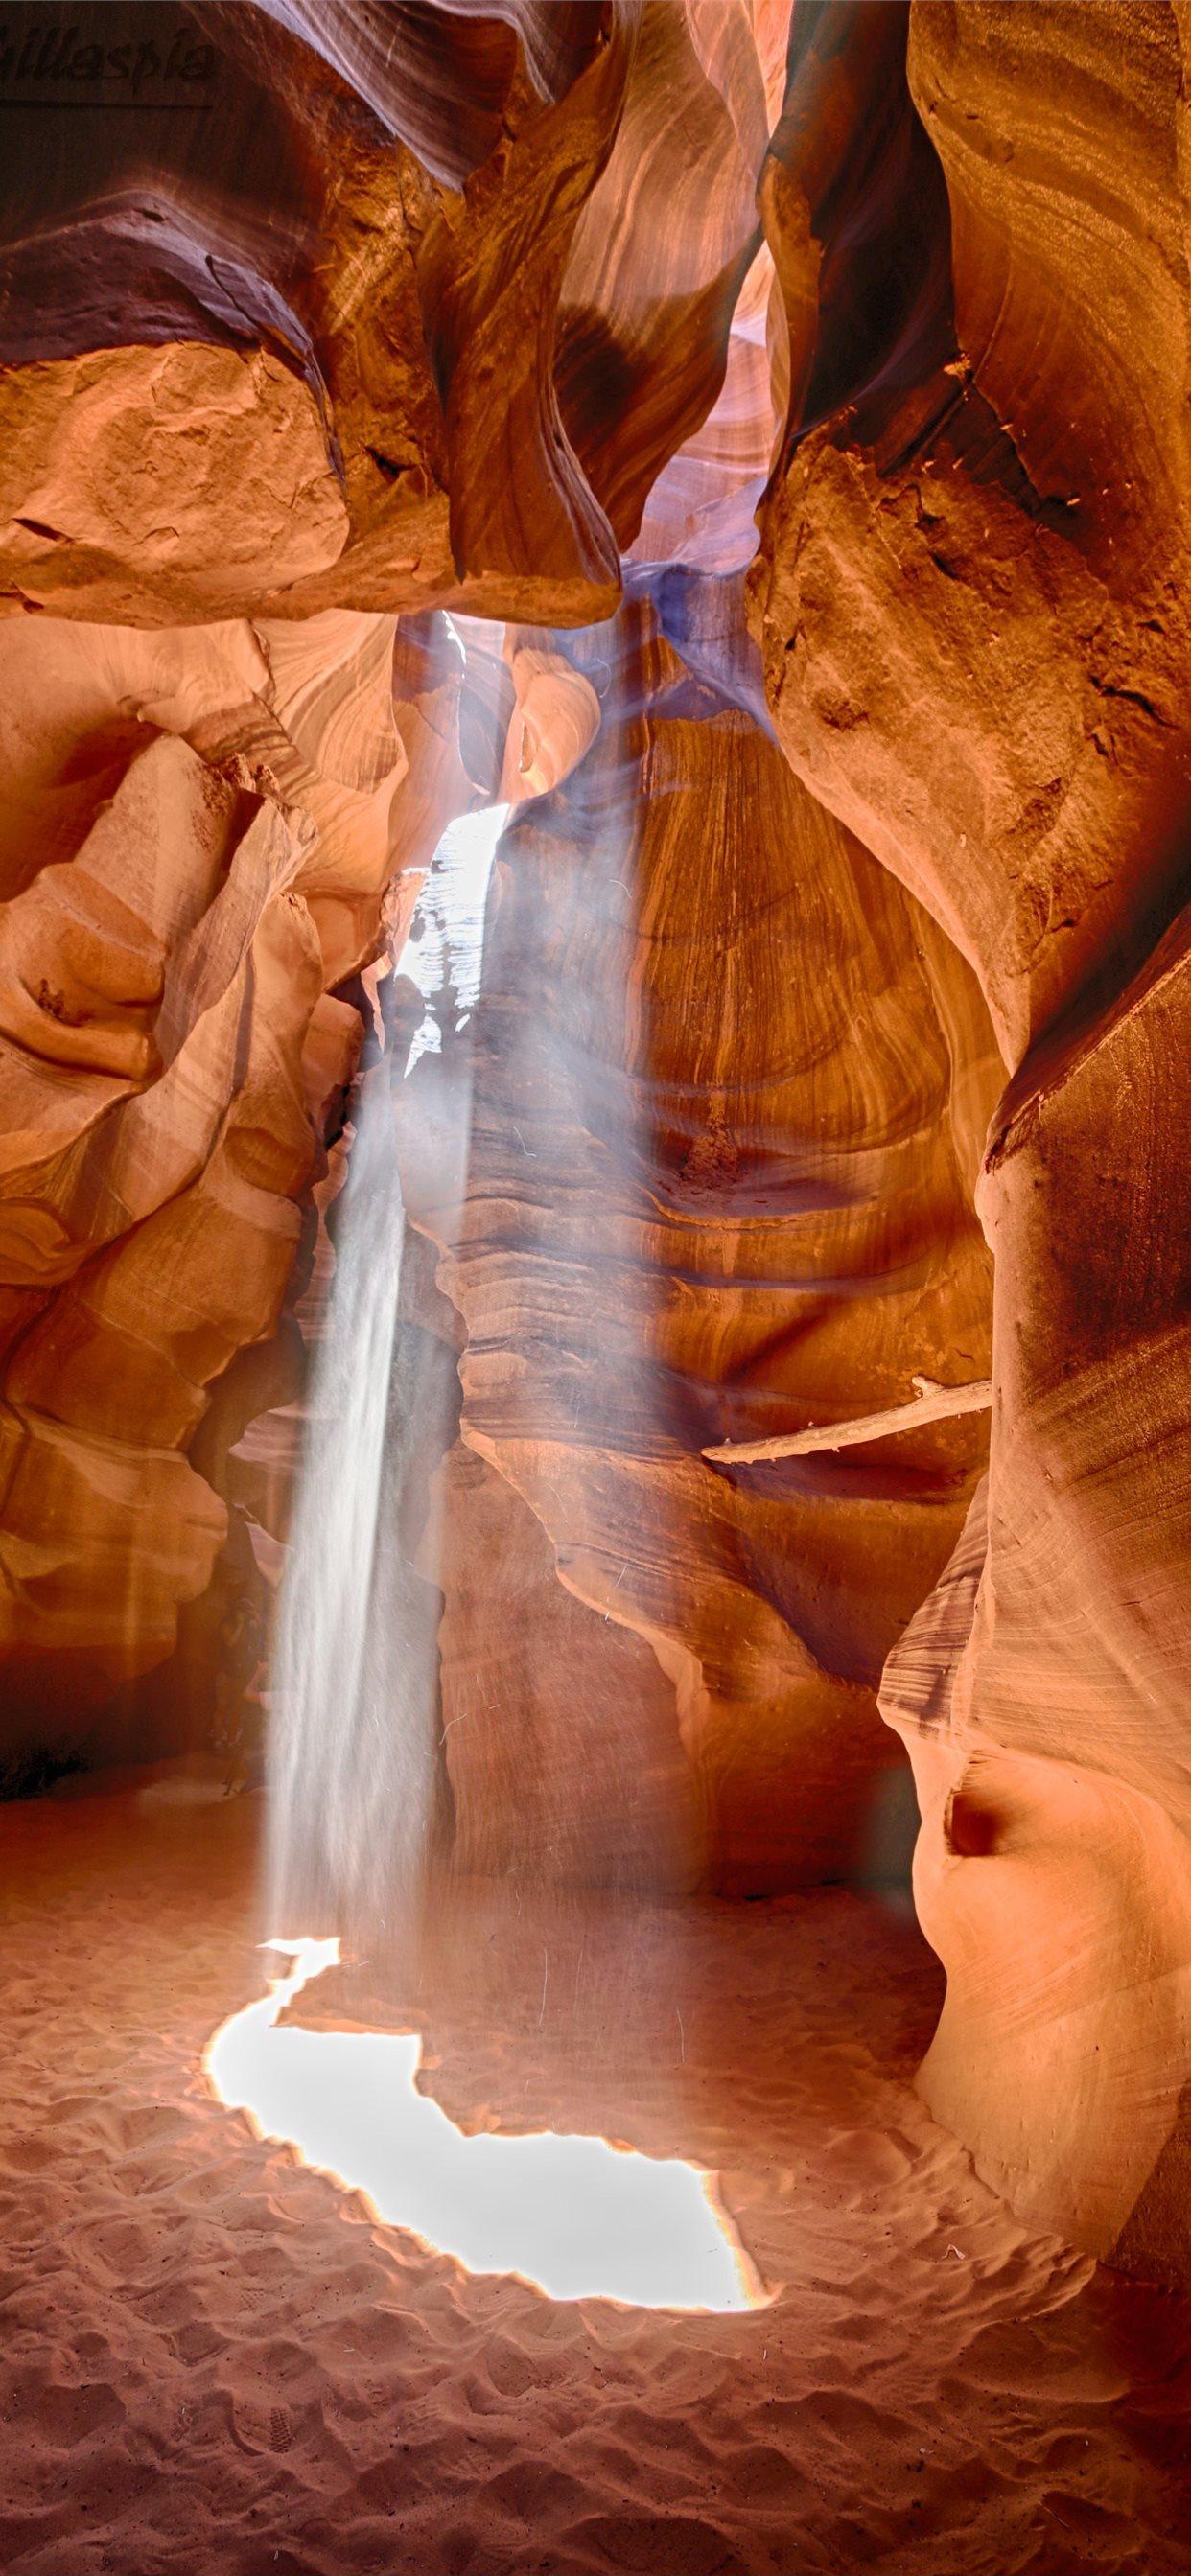 Antelope Canyon Earth Hq Pictures iPhone X